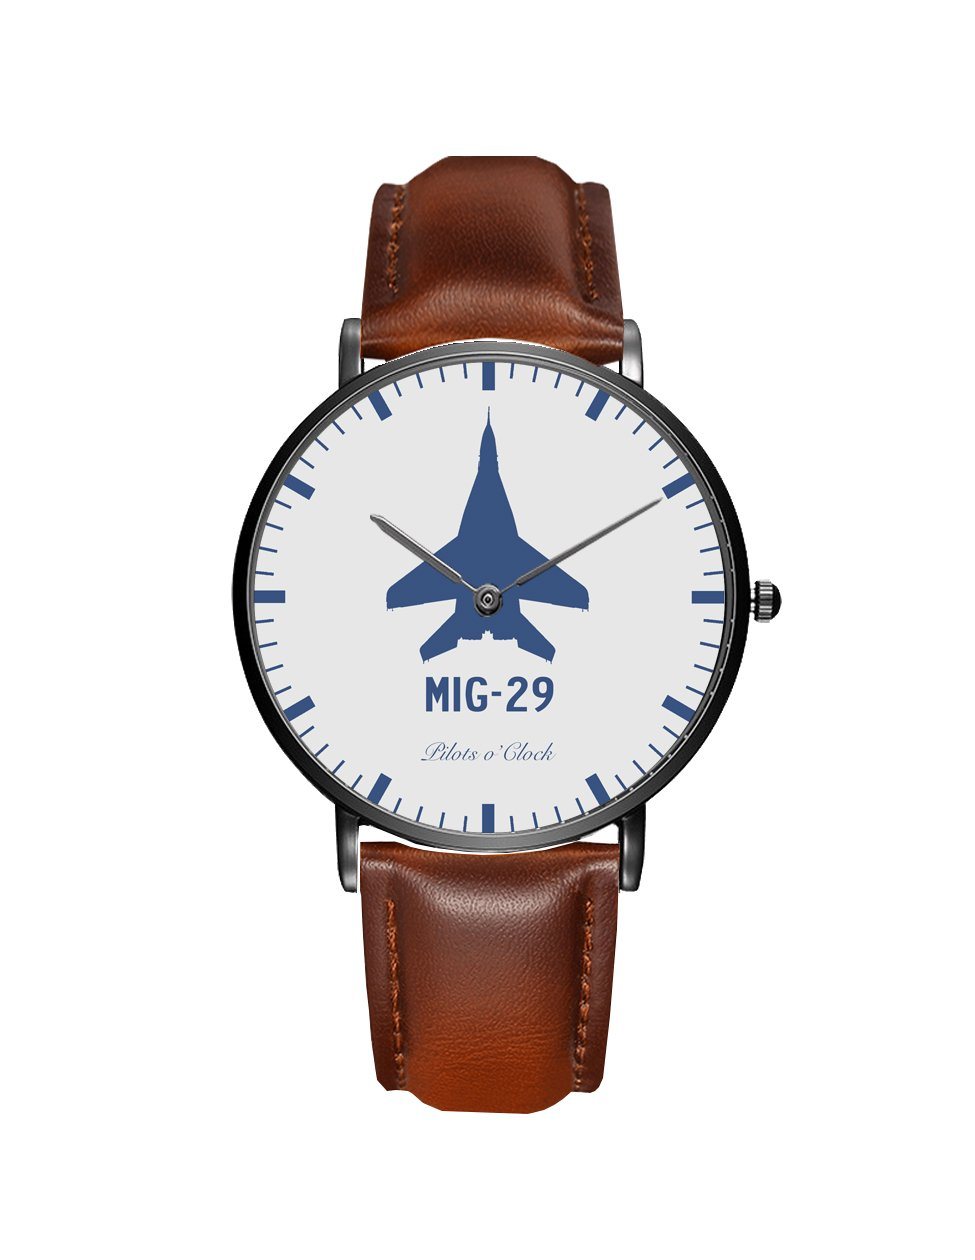 Mikoyan MIG-29 Leather Strap Watches Pilot Eyes Store Black & Brown Leather Strap 